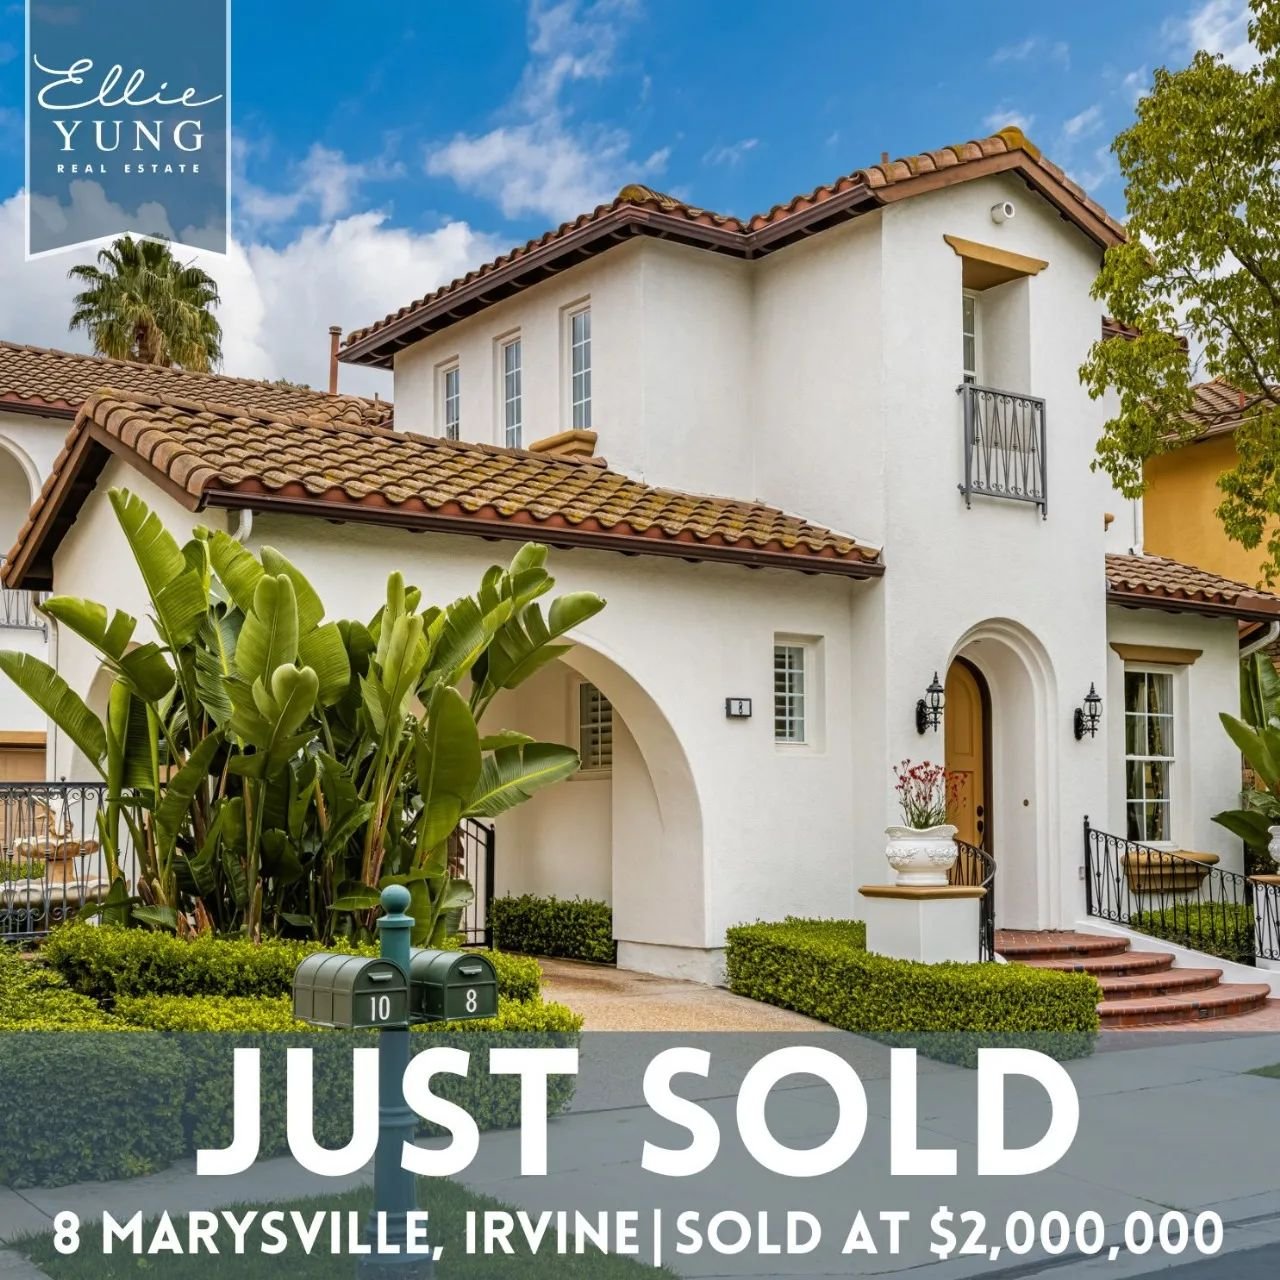 Exciting news! 🎉 8 Marysville has been snatched up with a whirlwind of activity: 15 offers flooded in within just 5 days, selling a remarkable $165K over the asking price, all in cash, and closing within a swift 14 days. But that's not all&mdash;her